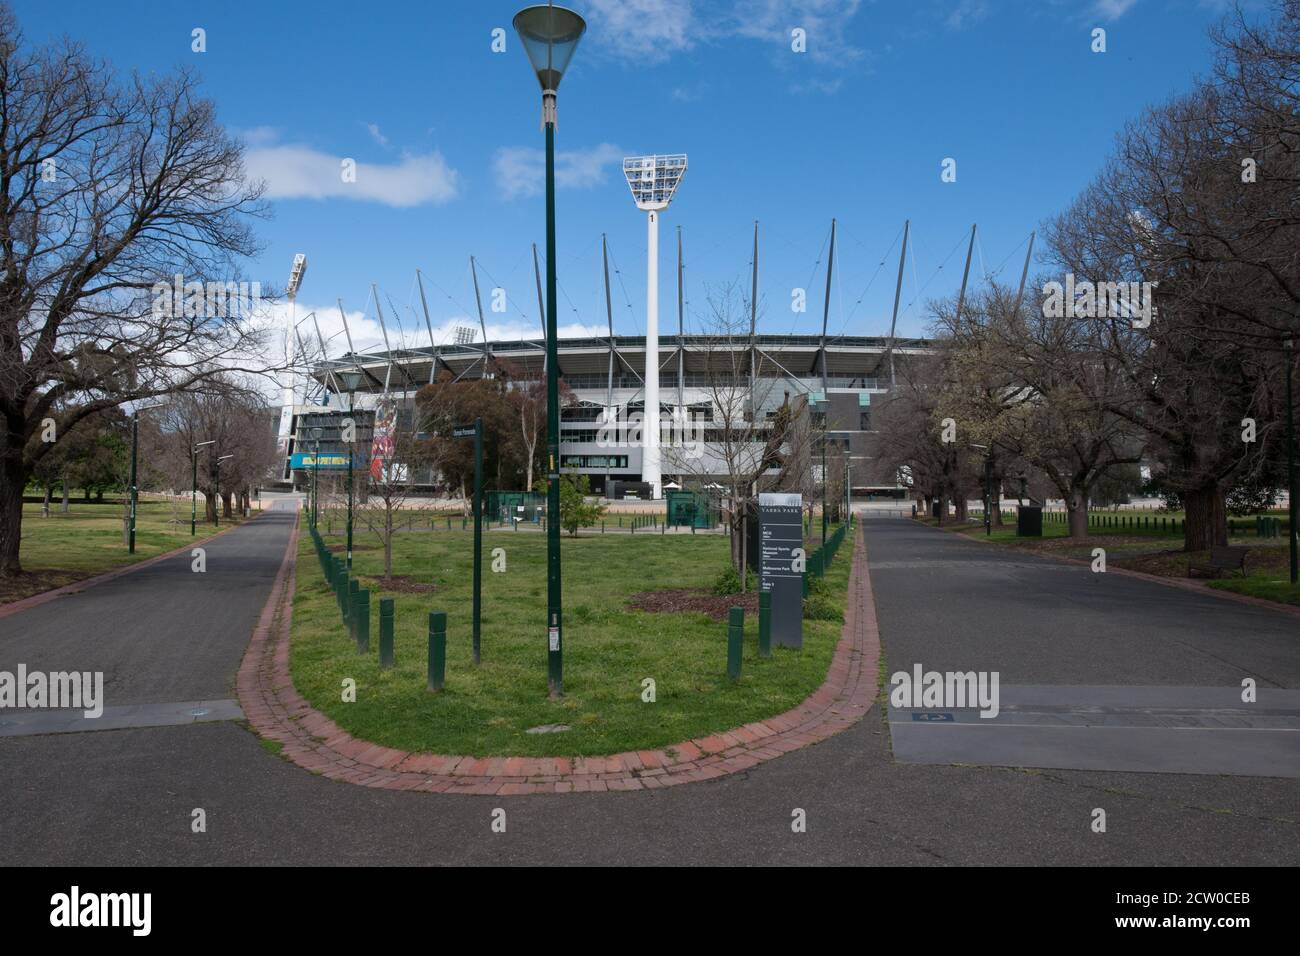 Melbourne, Australia 26 Sep 2020, the grounds around Melbourne Cricket Ground “MCG” empty except for a few members of the public out for a walk, on what would have been the Australian Football League “AFL” Grand Final, Melbourne Australia. Stock Photo